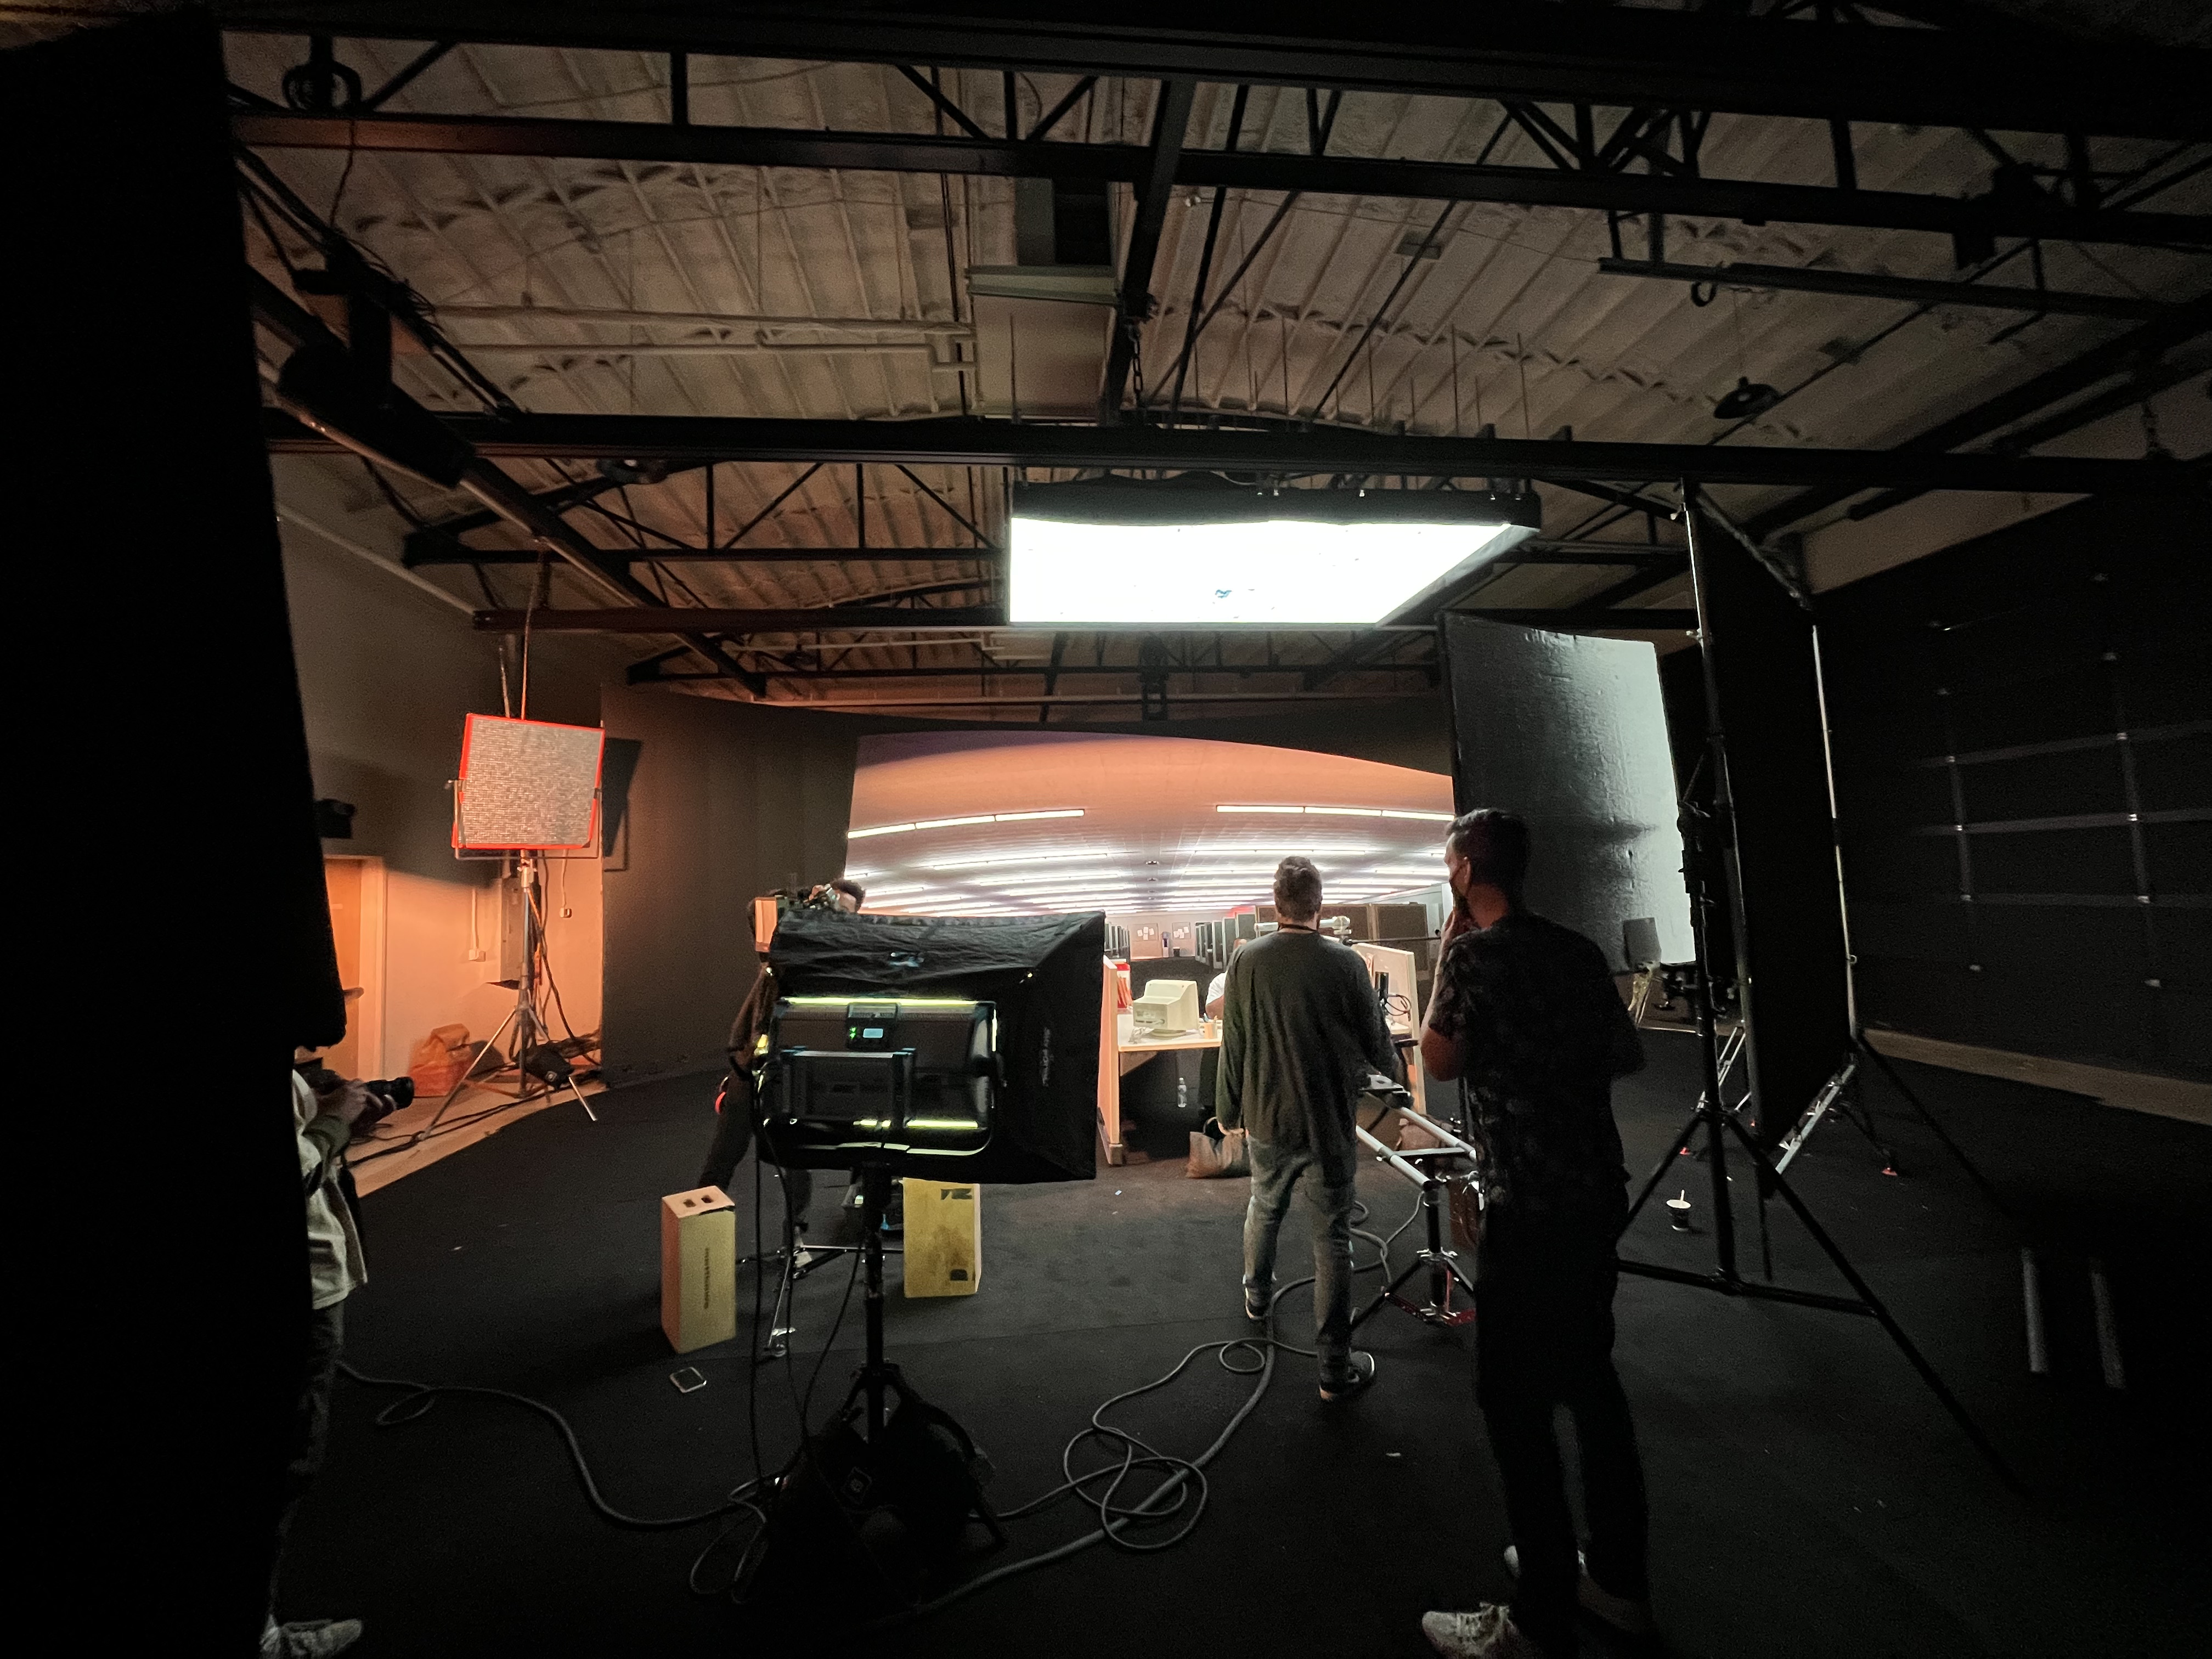  shooting the scene virtually at Arc Studios was a breeze.